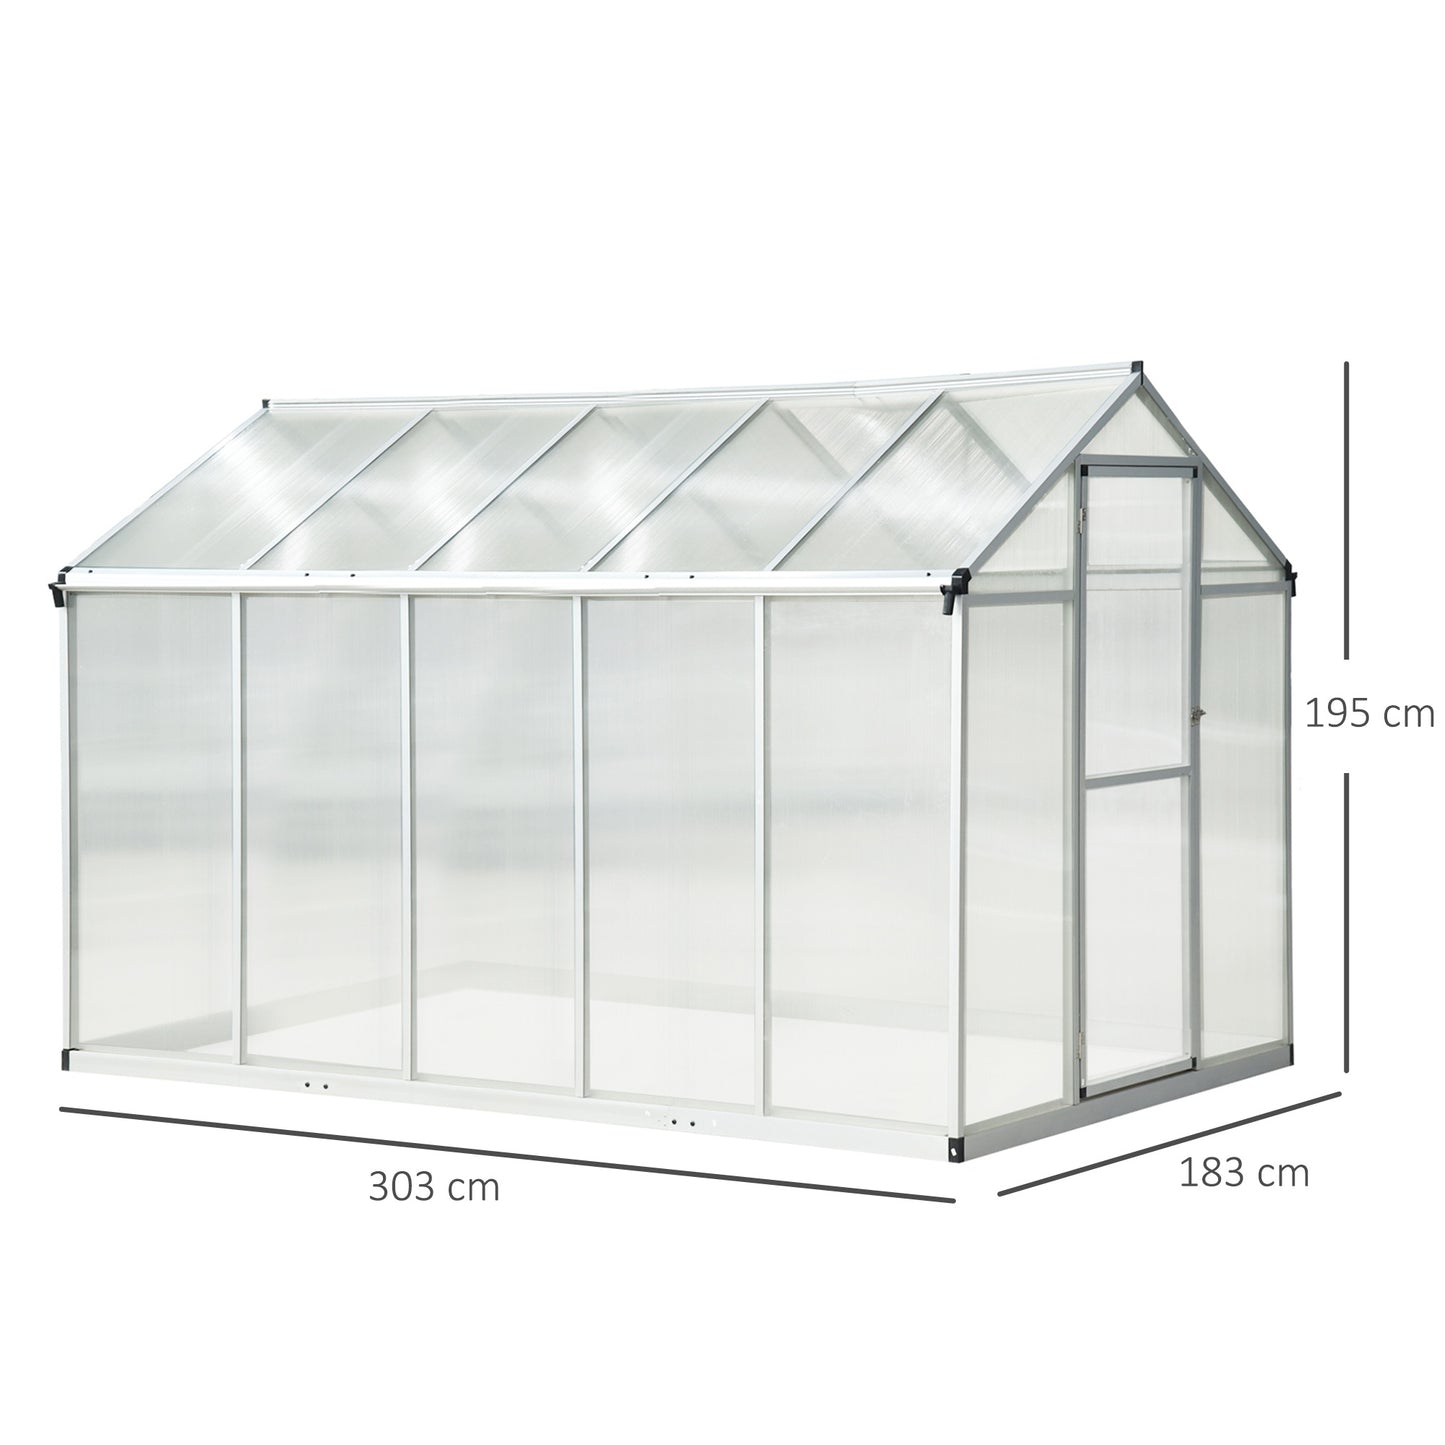 Outsunny 302x190x195cm Clear Polycarbonate Sheet Walk-In Greenhouse